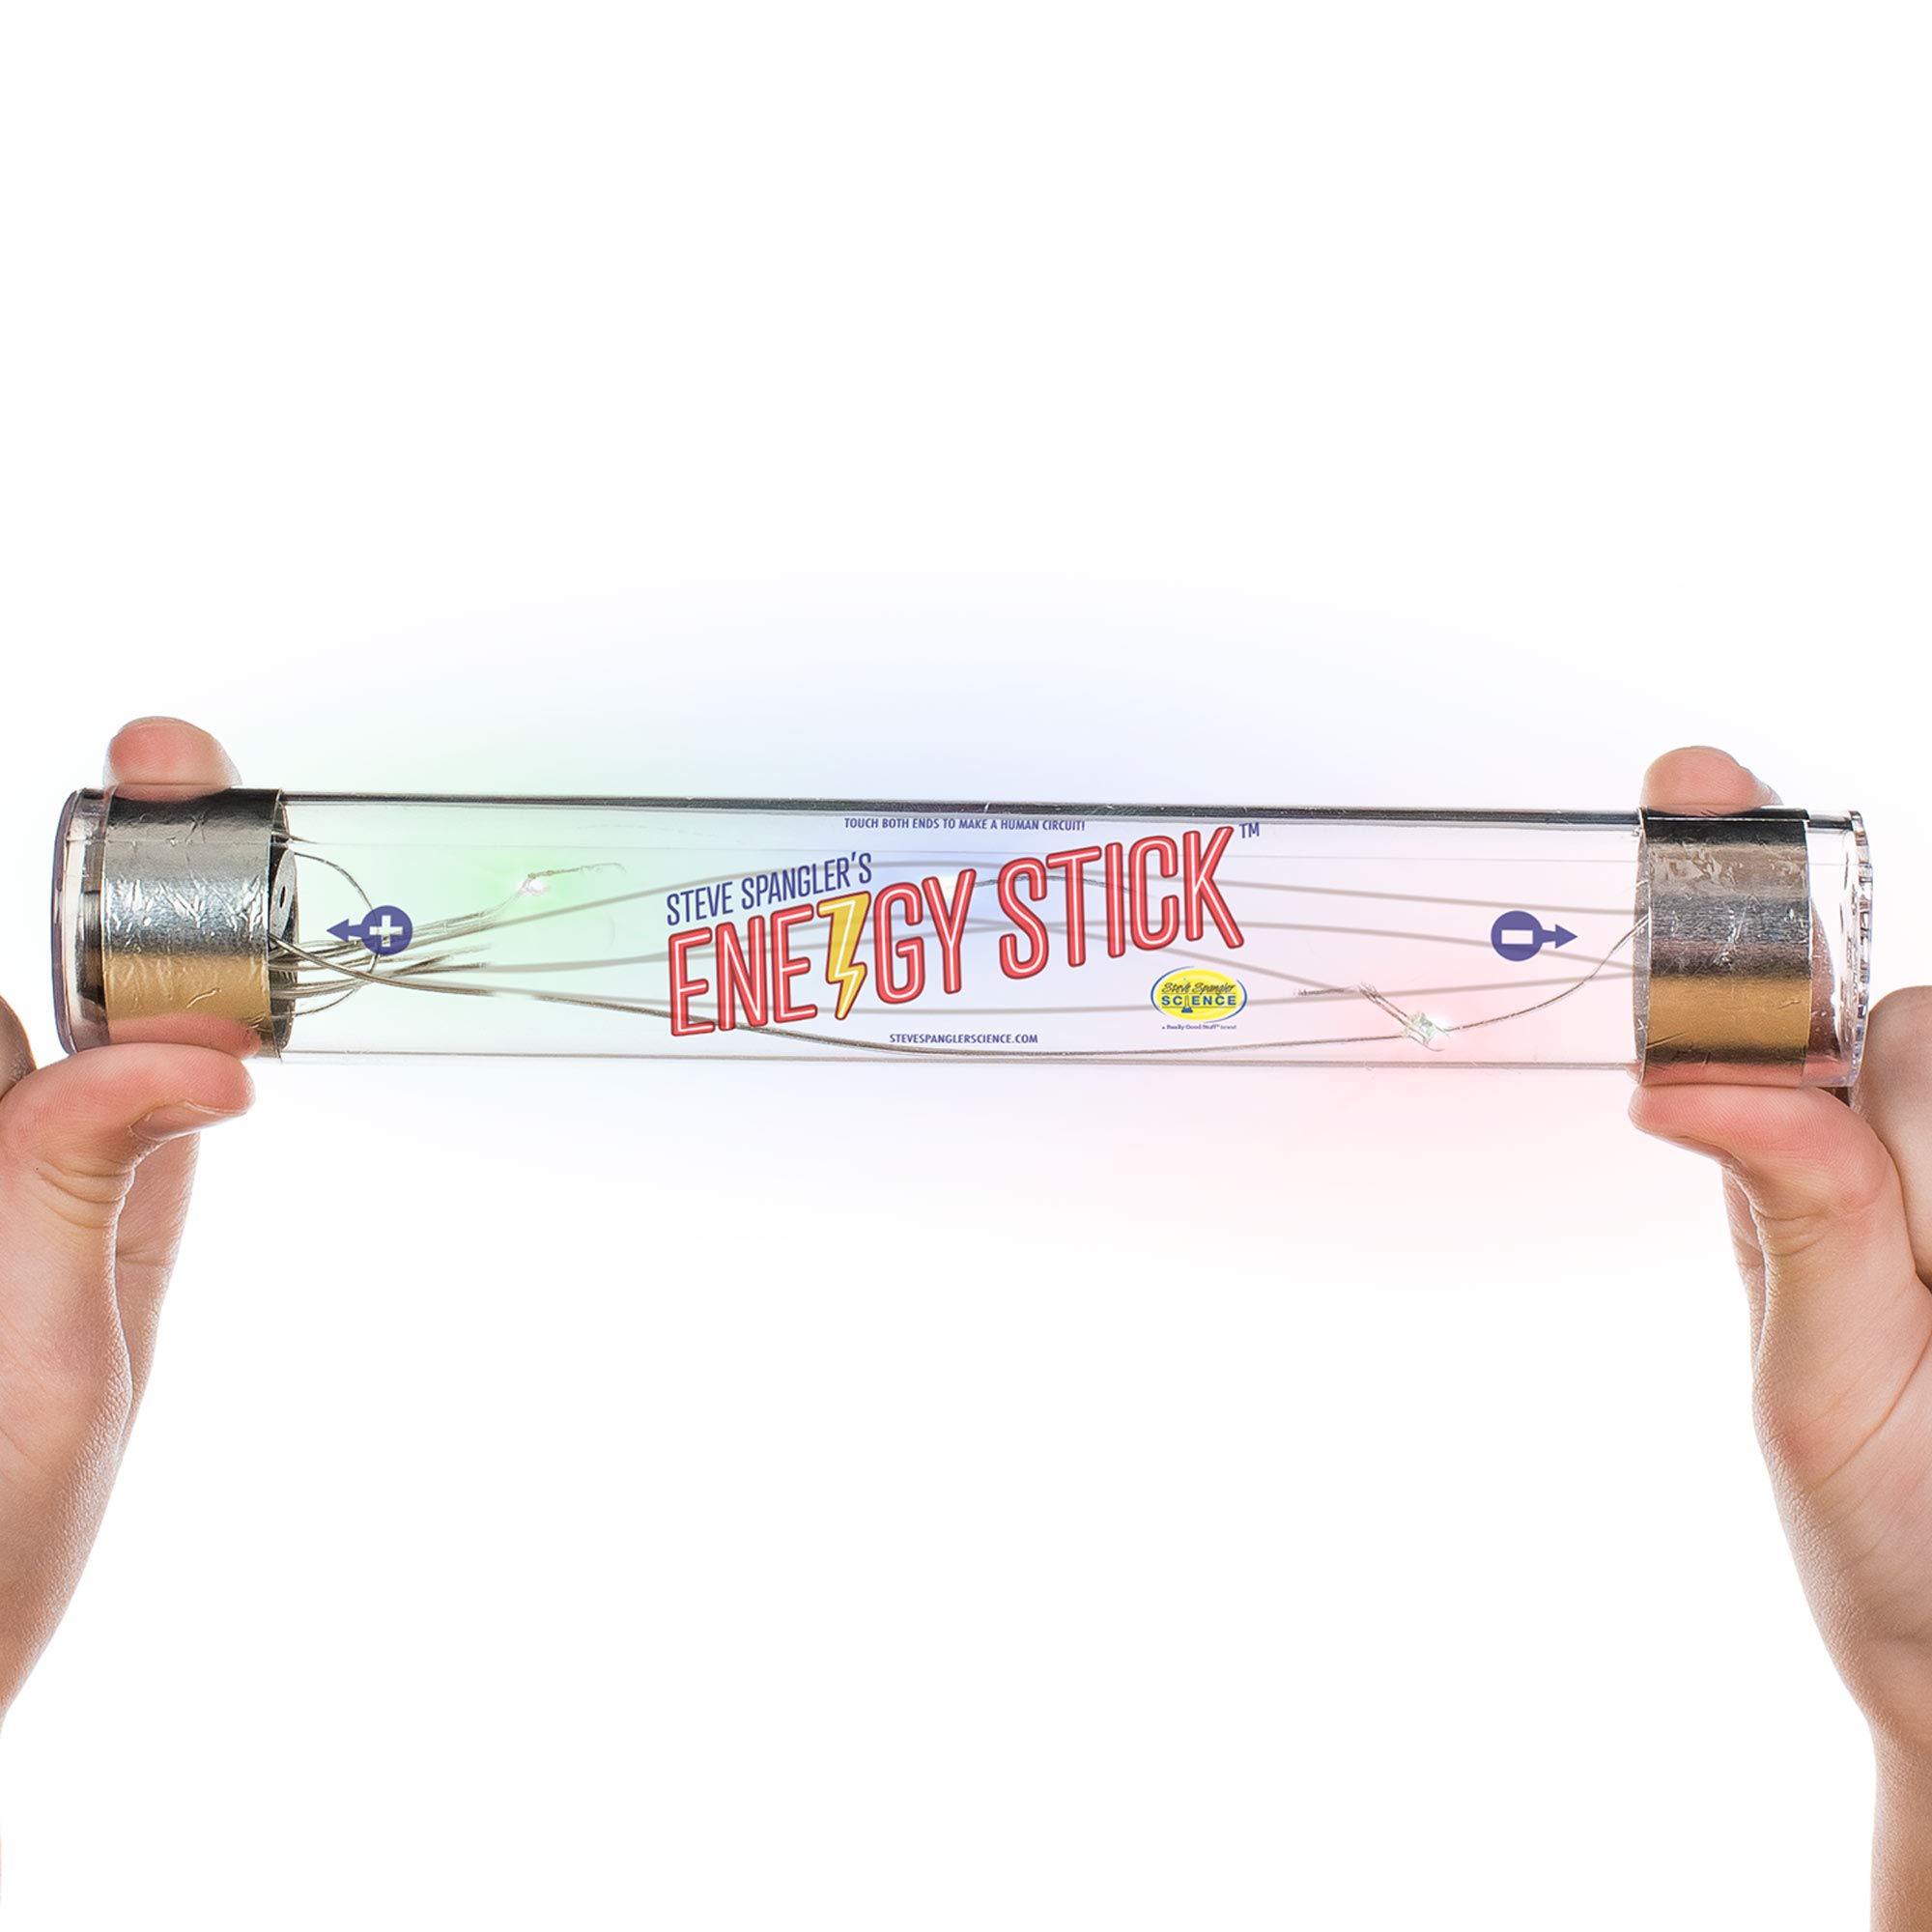 Steve Spangler Science Energy Stick – Fun Science Kits for Kids to Learn About Conductors of Electricity, Safe, Hands-On STEM Learning Toy, Independent or Group Activity for Classrooms or Home